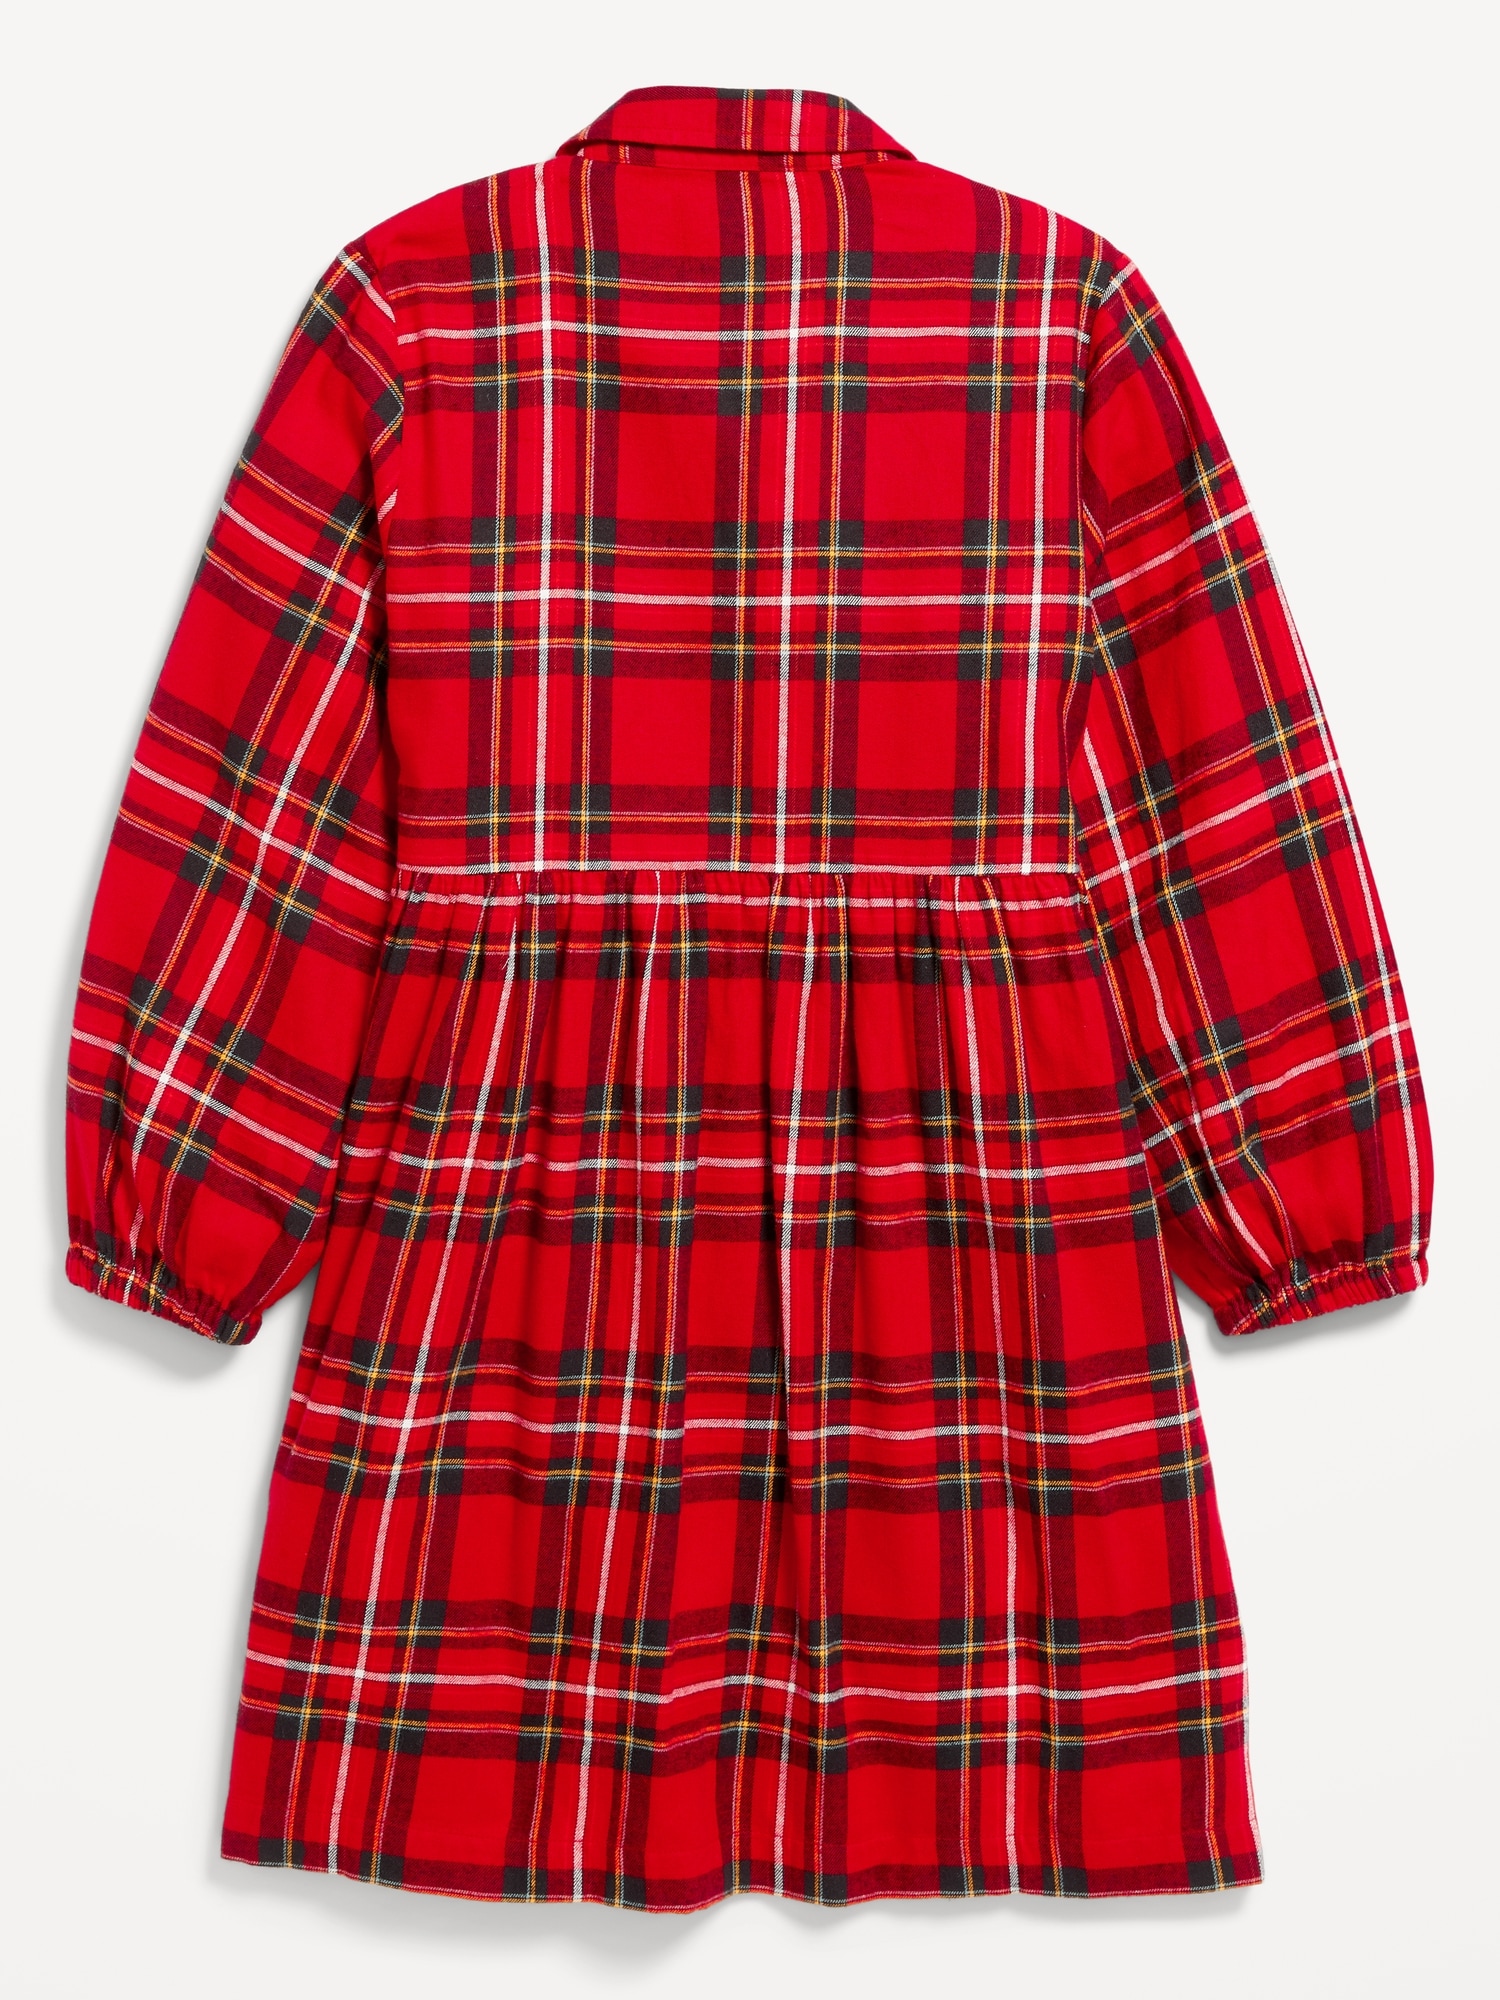 Matching Long-Sleeve Button-Front Plaid Dress for Girls